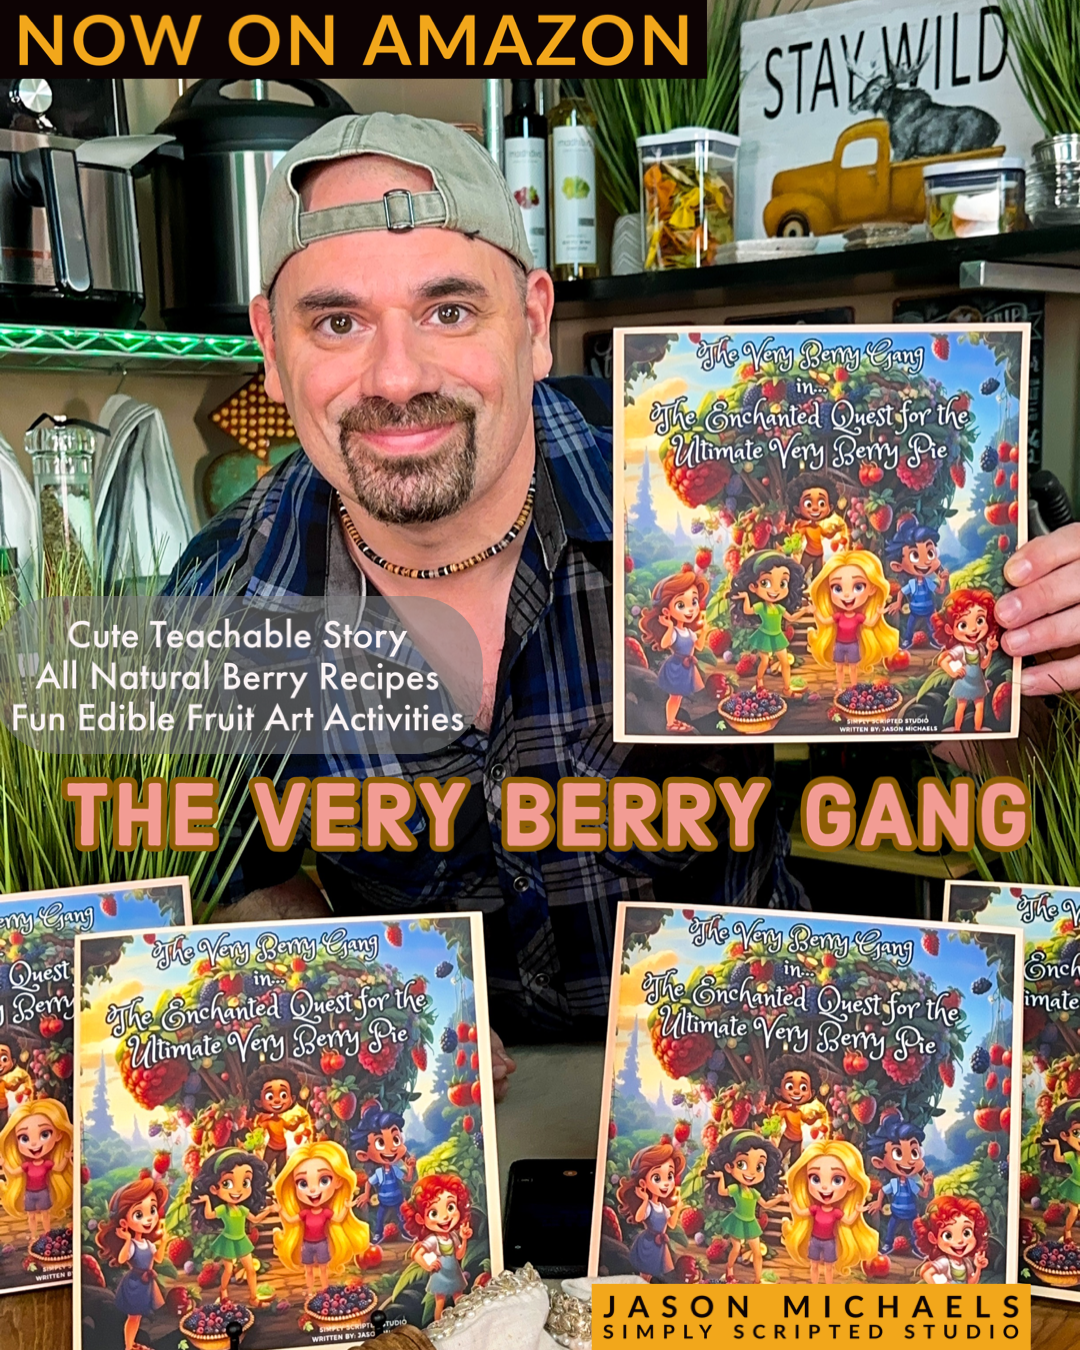 Jason Promoting "The Very Berry Gang"